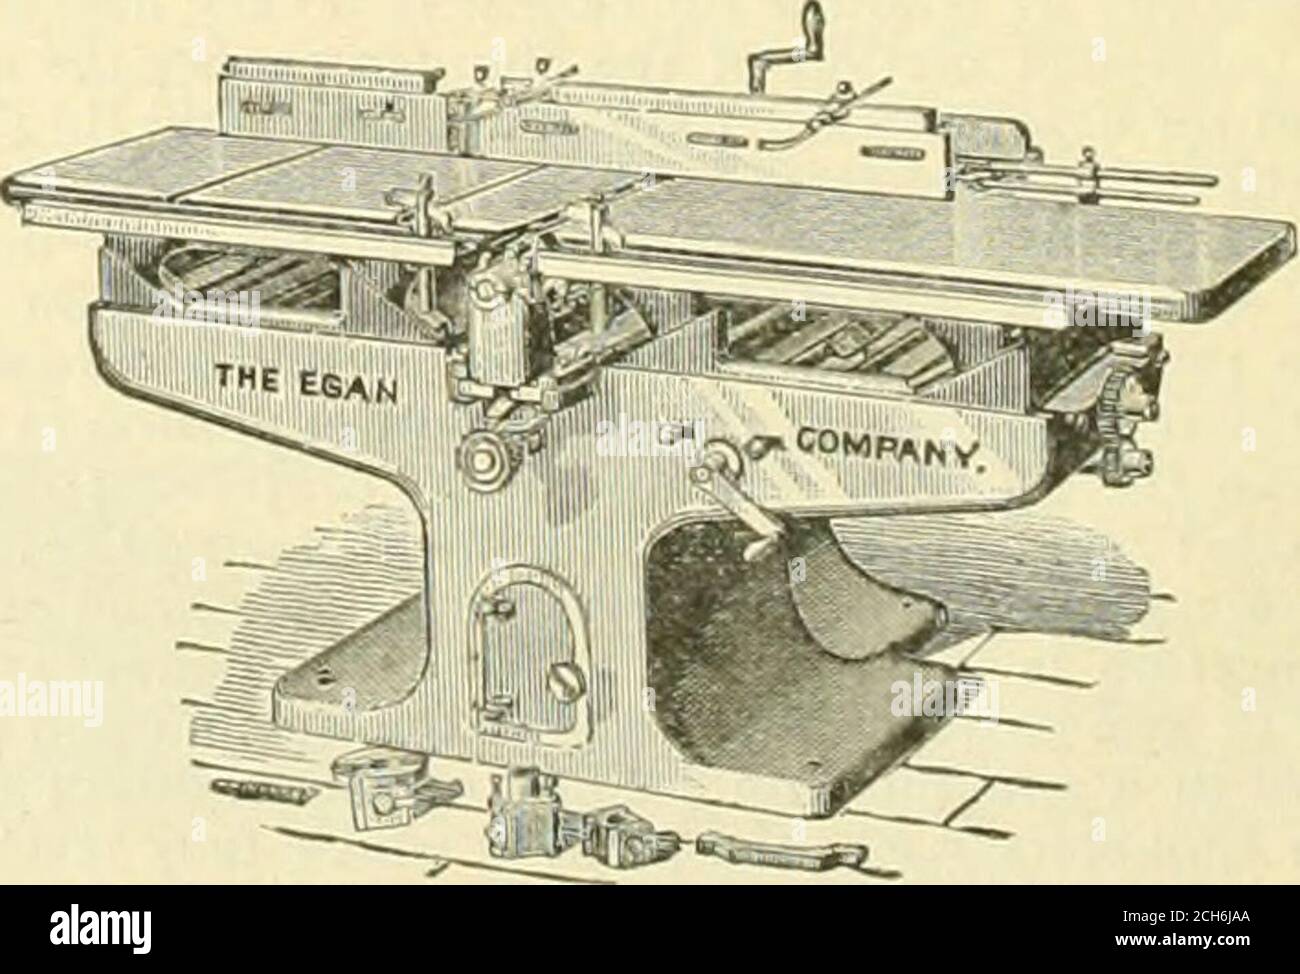 . American engineer and railroad journal . eavy and light work, possessing allthe advantages of the No. i and No. 2 machines, but of greatercapacity. It will be found especially adapted to car work, agri-cultural work, general wood-working purposes, and for dress-ing and taking out of twist large timbers and planing a rightangle at one operation. The main head is slotted on all foursides, and 19J2 in. wide, and, running in connection with thefour-sided upright head, makes a very desirable machine forgeneral use, and gives the very best of satisfaction. The column is one complete casting cored Stock Photo